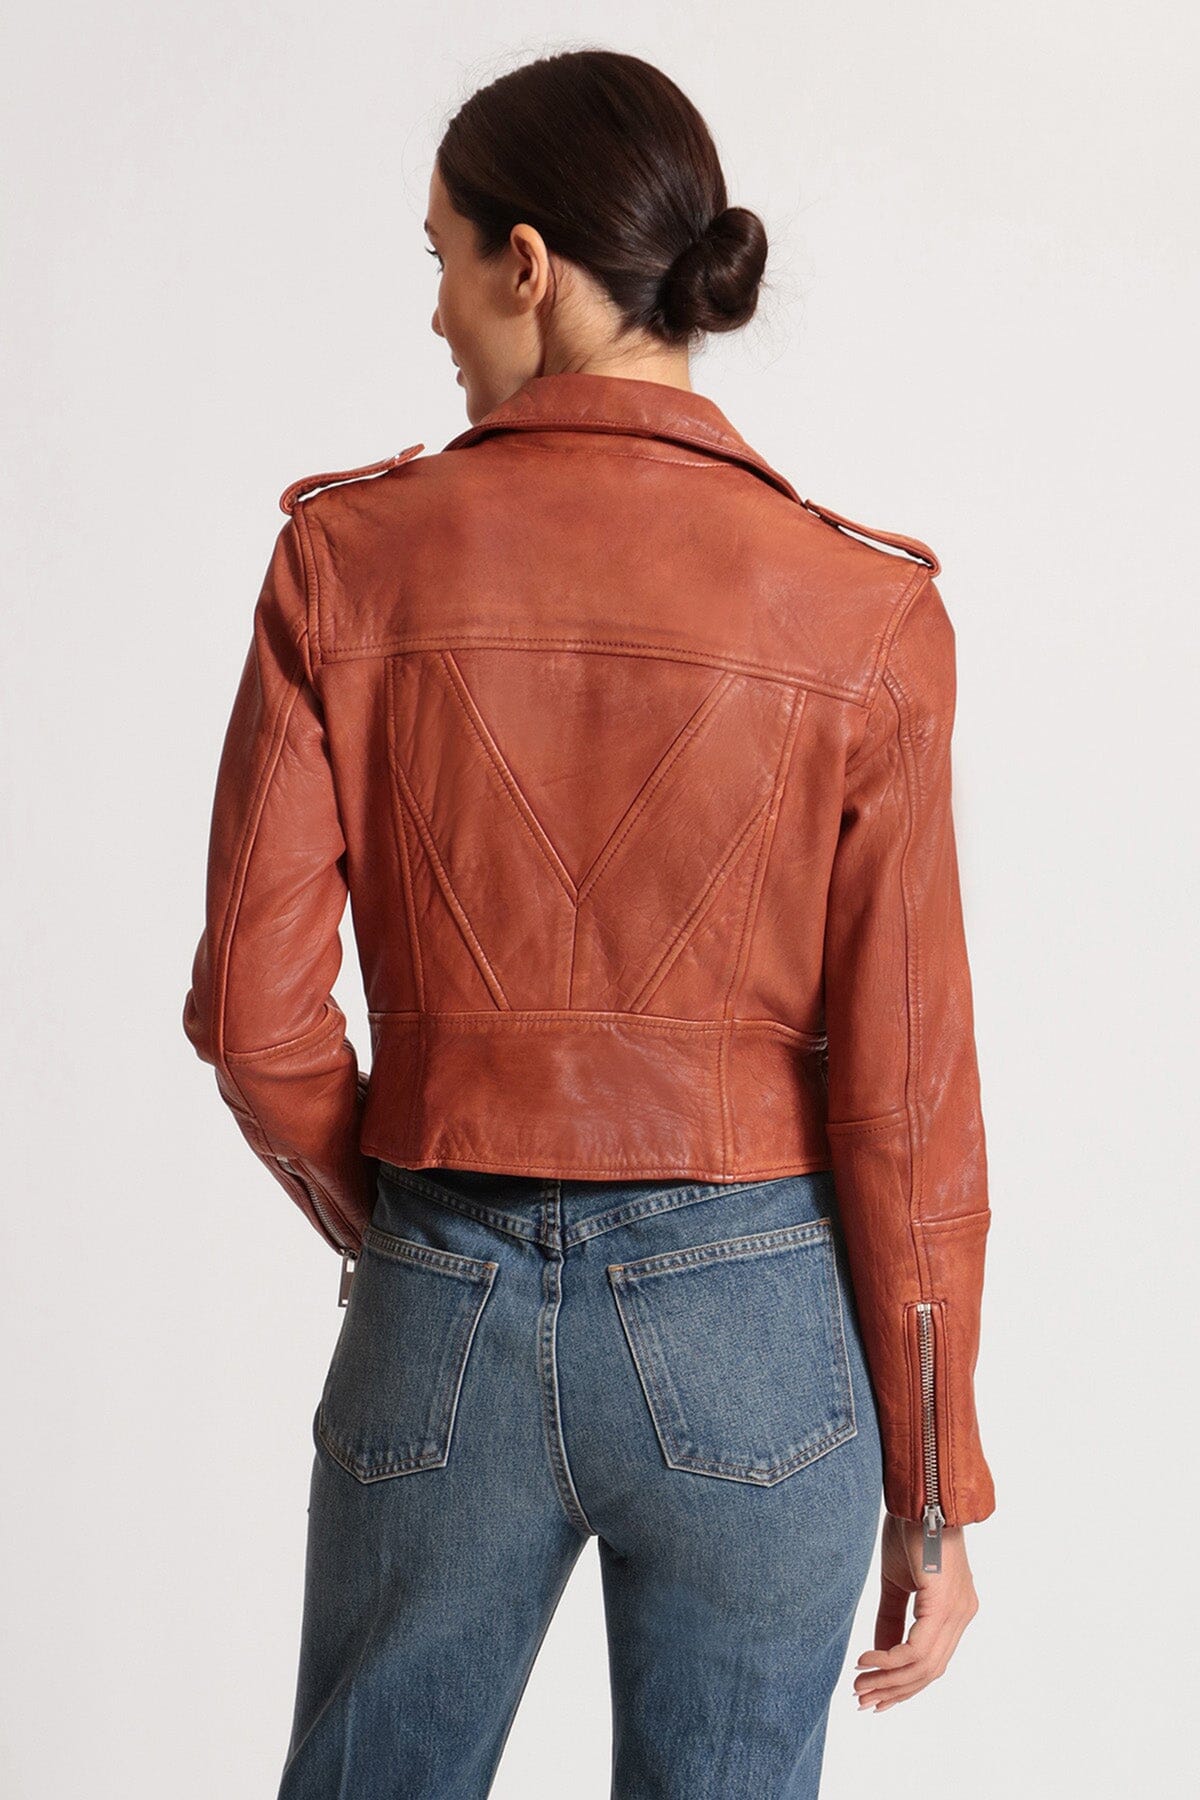 Red genuine leather cropped biker jacket coat - figure flattering Fall fashion jackets coats for ladies by Avec Les Filles